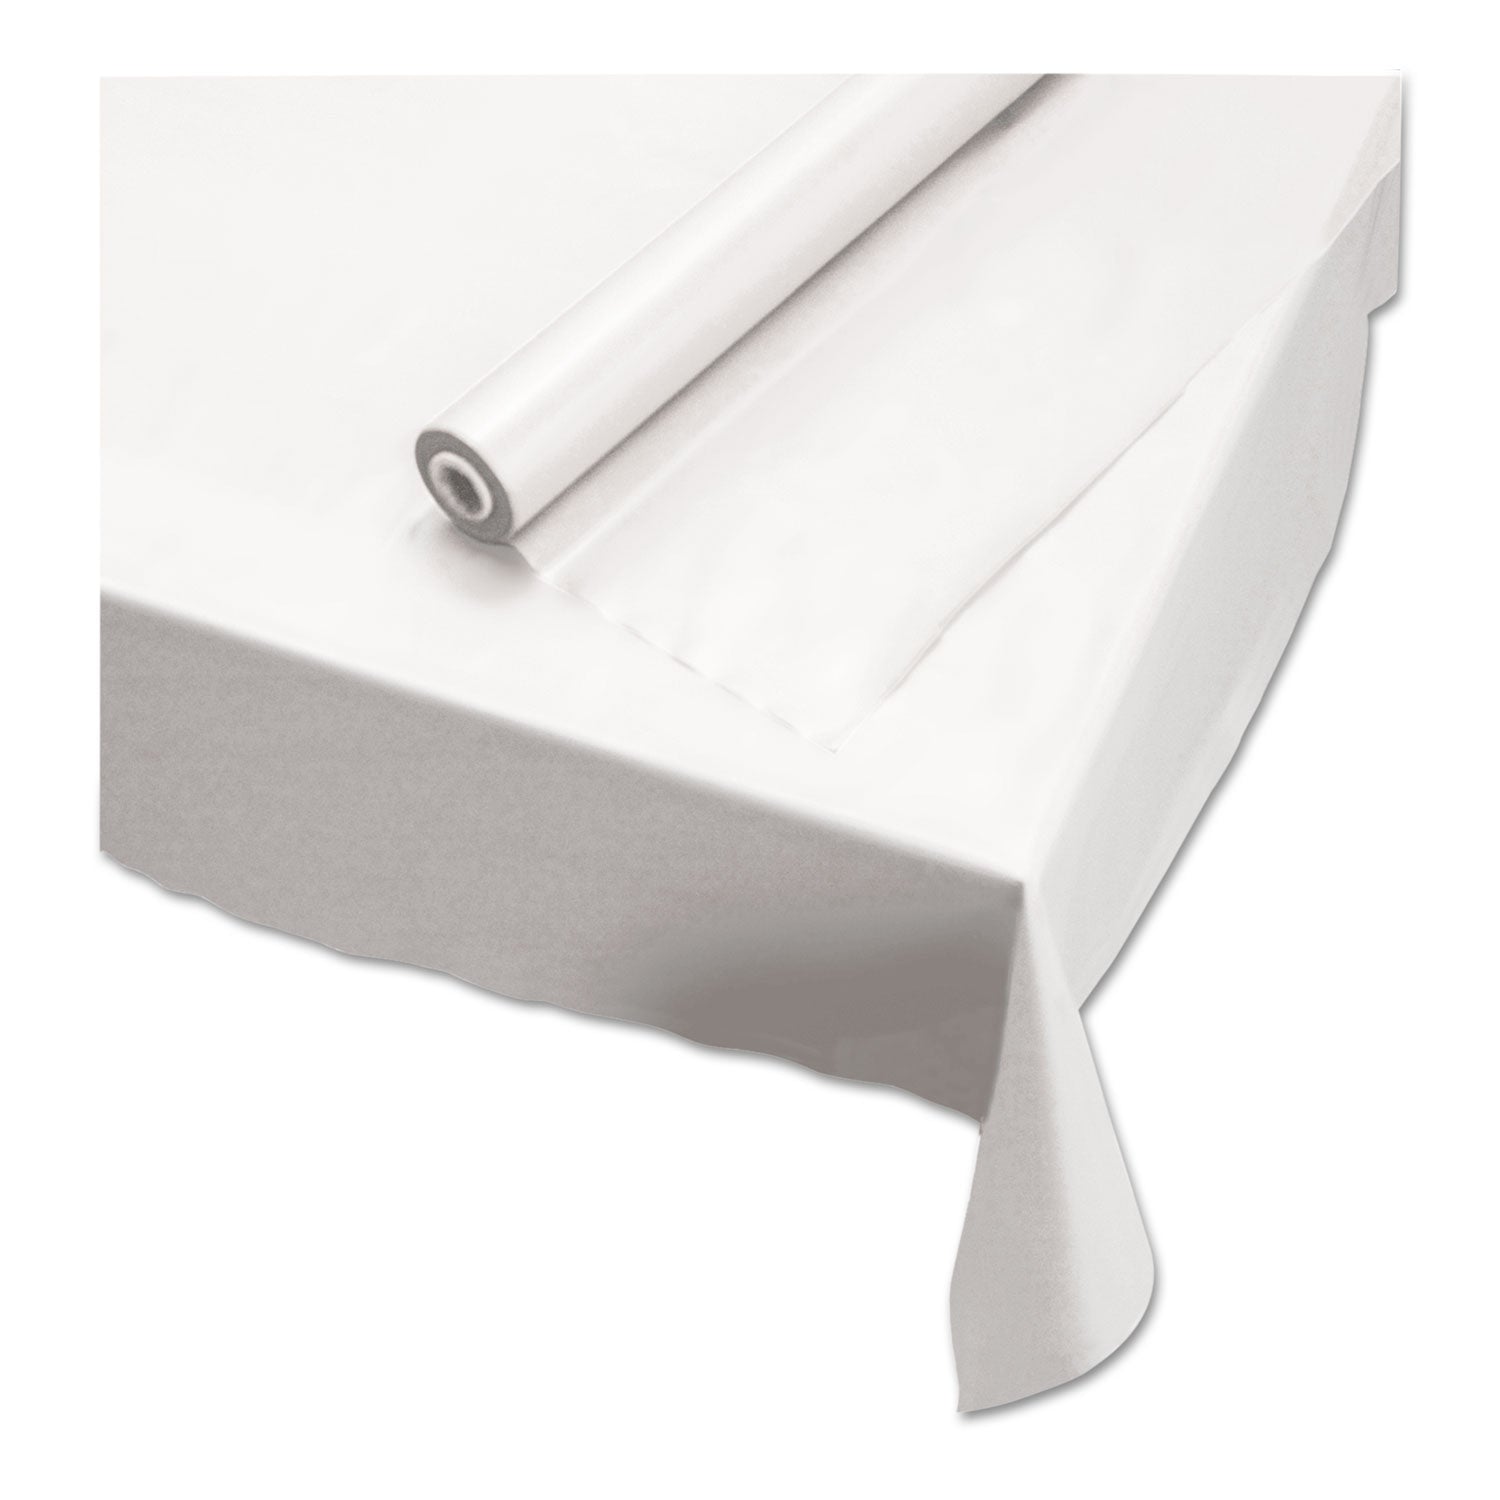 plastic-roll-tablecover-40-x-100-ft-white_hfm113000 - 1